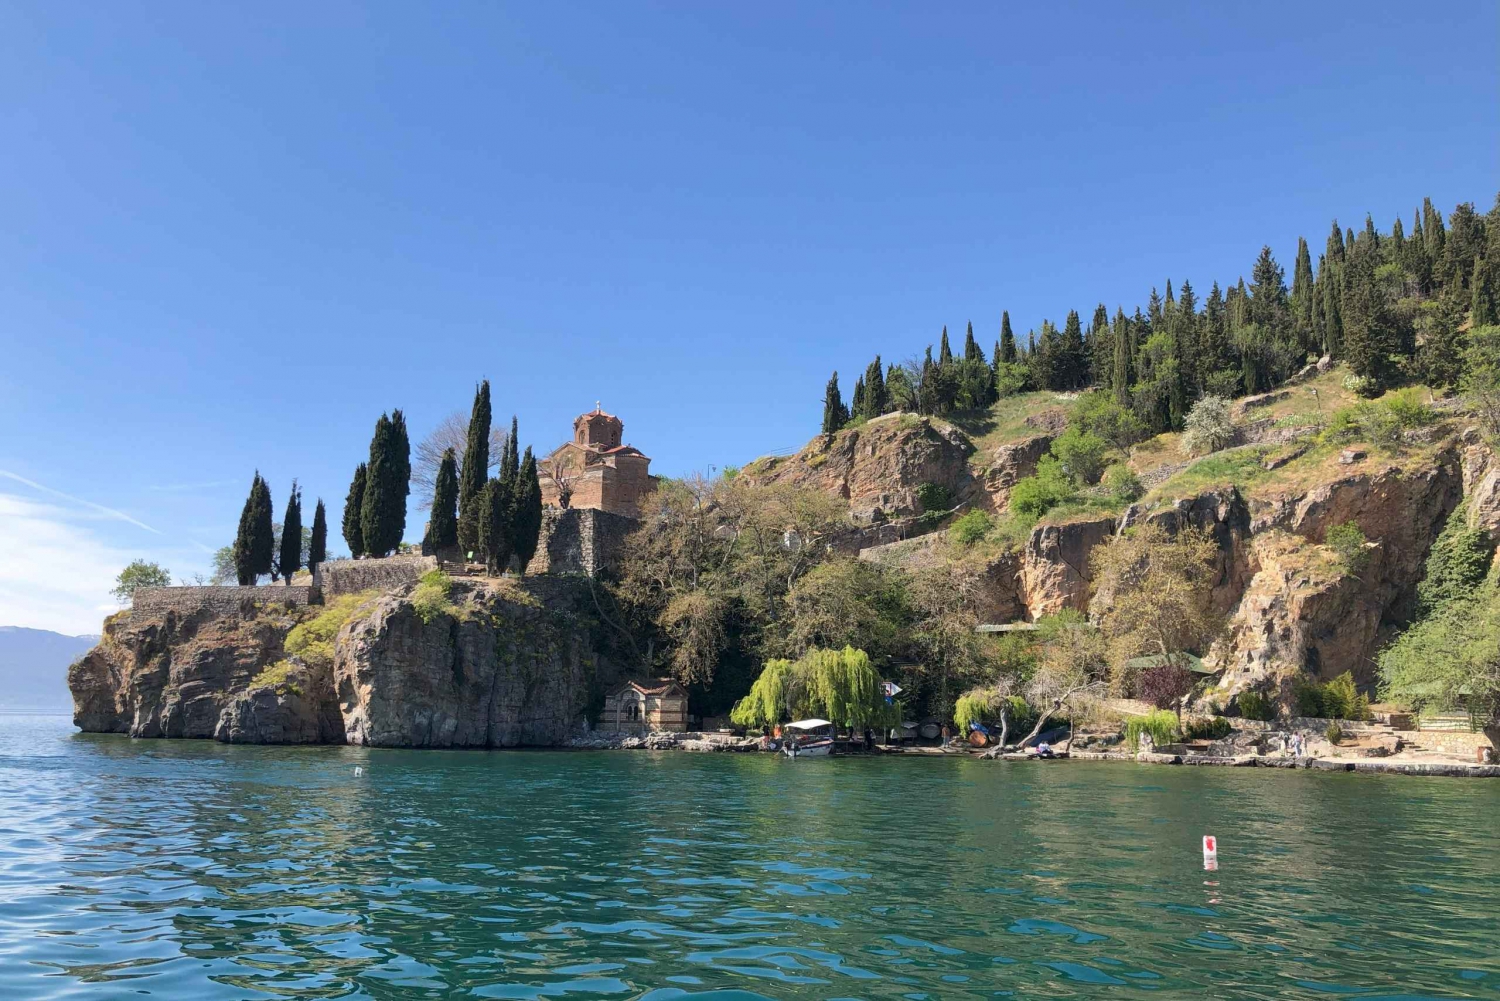 Explore the TOP 10 Places in Ohrid + Free Boat Cruise!